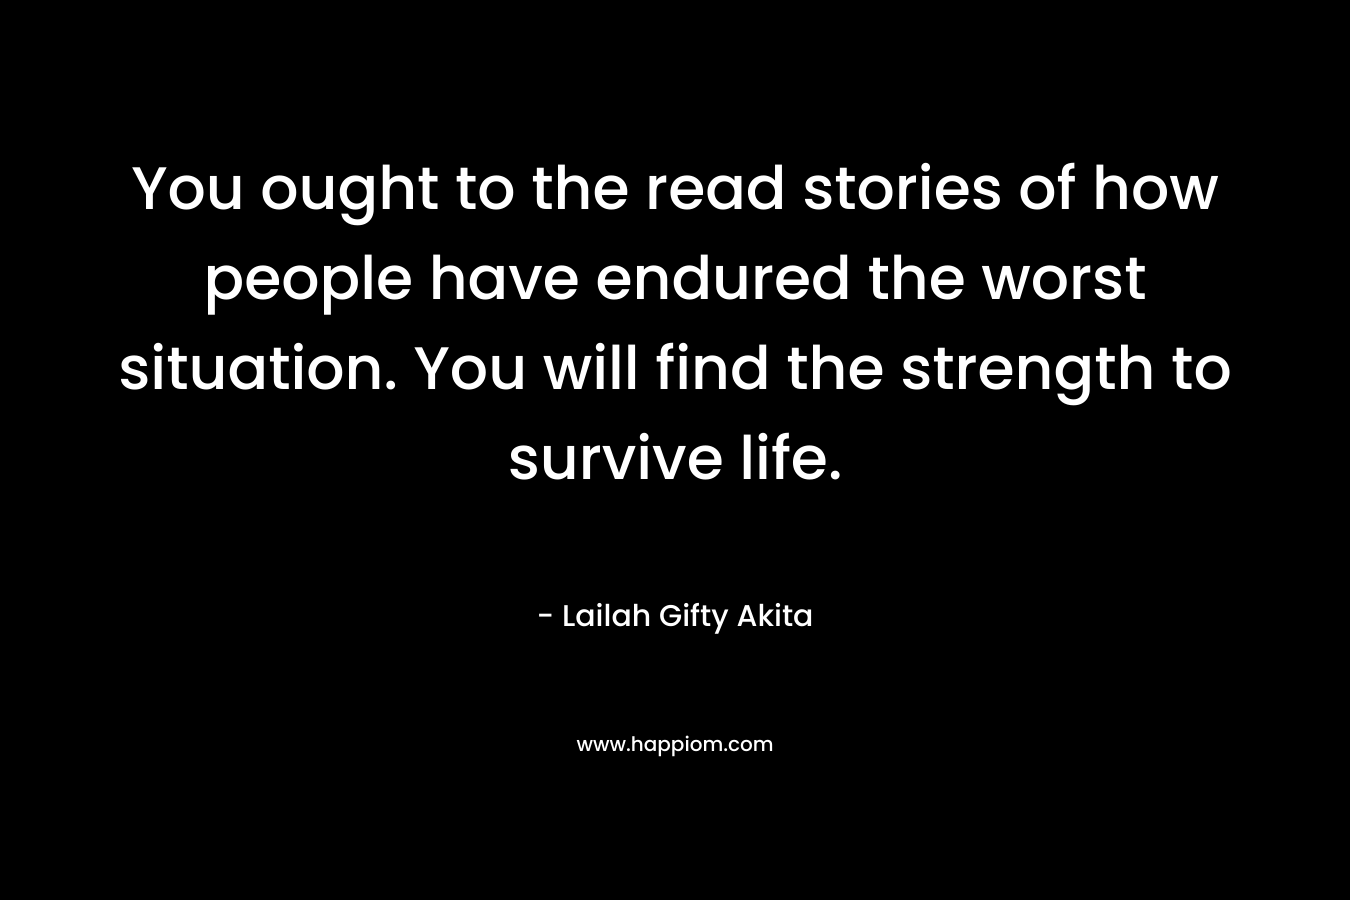 You ought to the read stories of how people have endured the worst situation. You will find the strength to survive life.